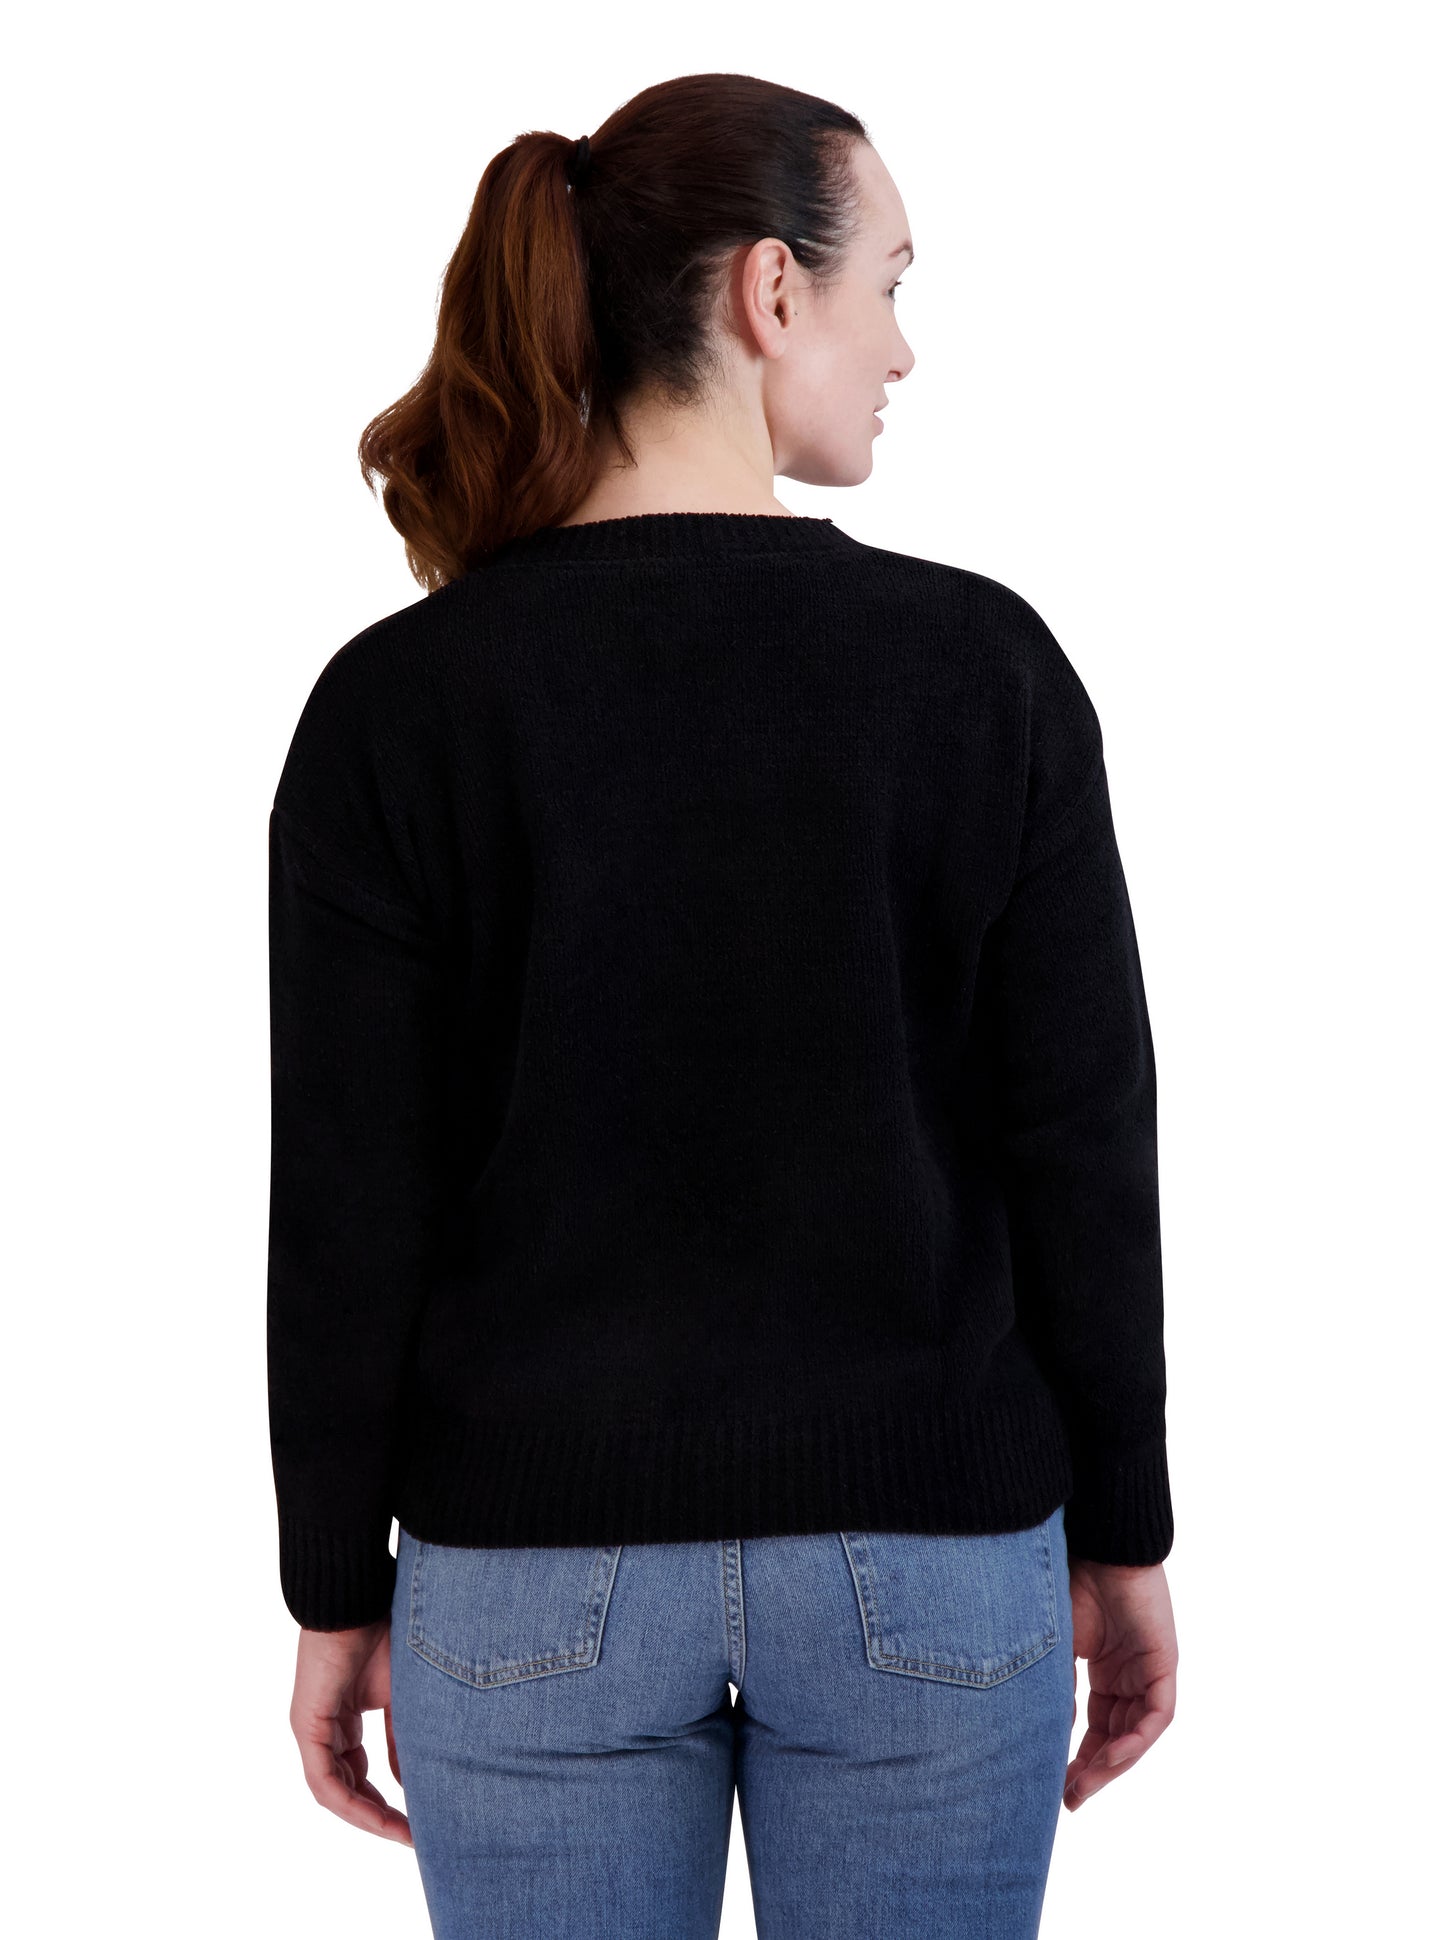 Women's Embroidered "WEEKEND" Chenille Sweater - Rae Dunn Wear - W Sweater